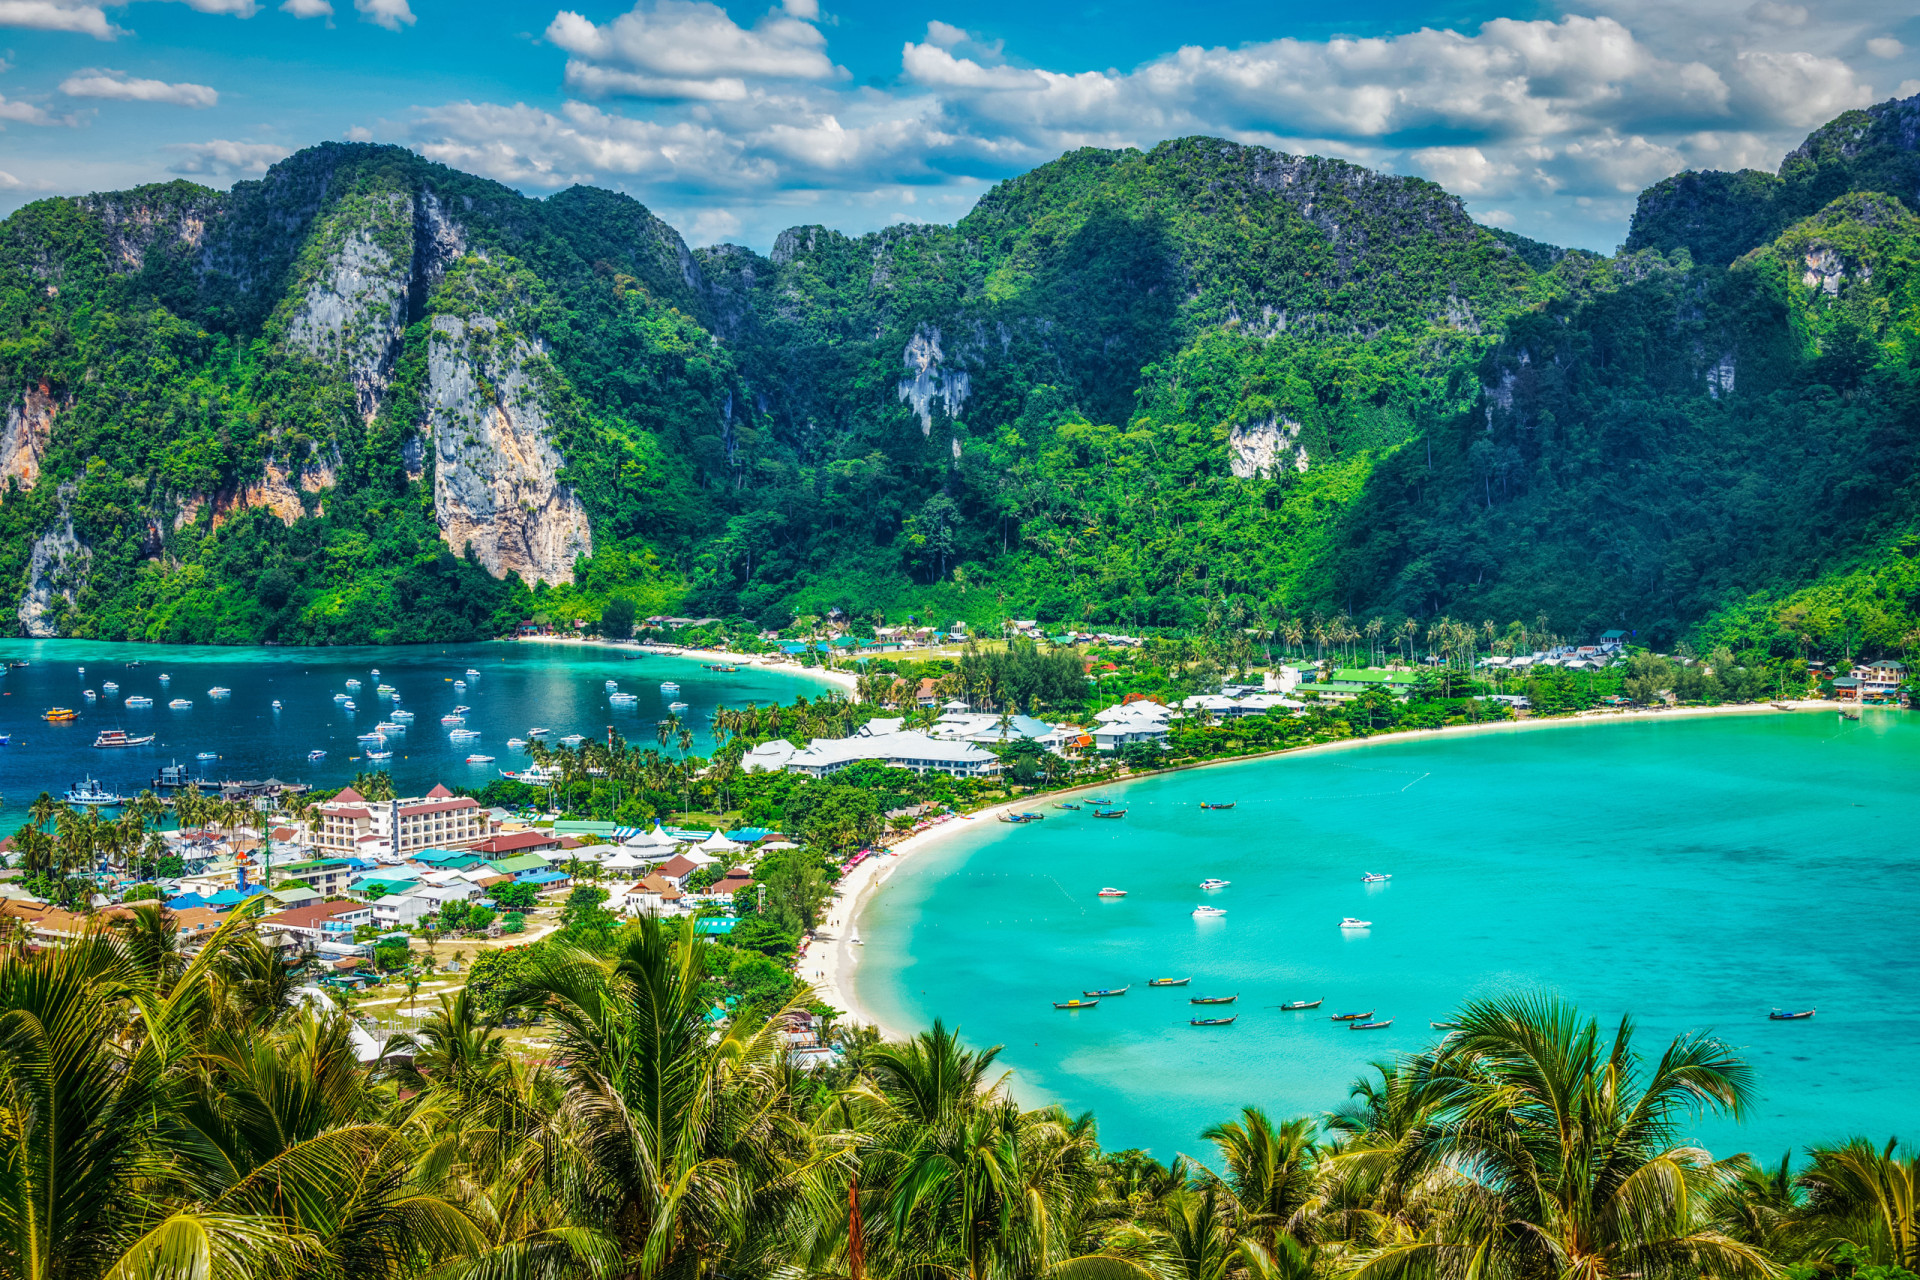 <p>Thailand introduced a tourist tax to the price of flights in April 2022. The fee for all international visitors is 300 baht (US$8.44).</p><p><a href="https://www.msn.com/en-ph/community/channel/vid-7xx8mnucu55yw63we9va2gwr7uihbxwc68fxqp25x6tg4ftibpra?cvid=94631541bc0f4f89bfd59158d696ad7e">Follow us and access great exclusive content every day</a></p>